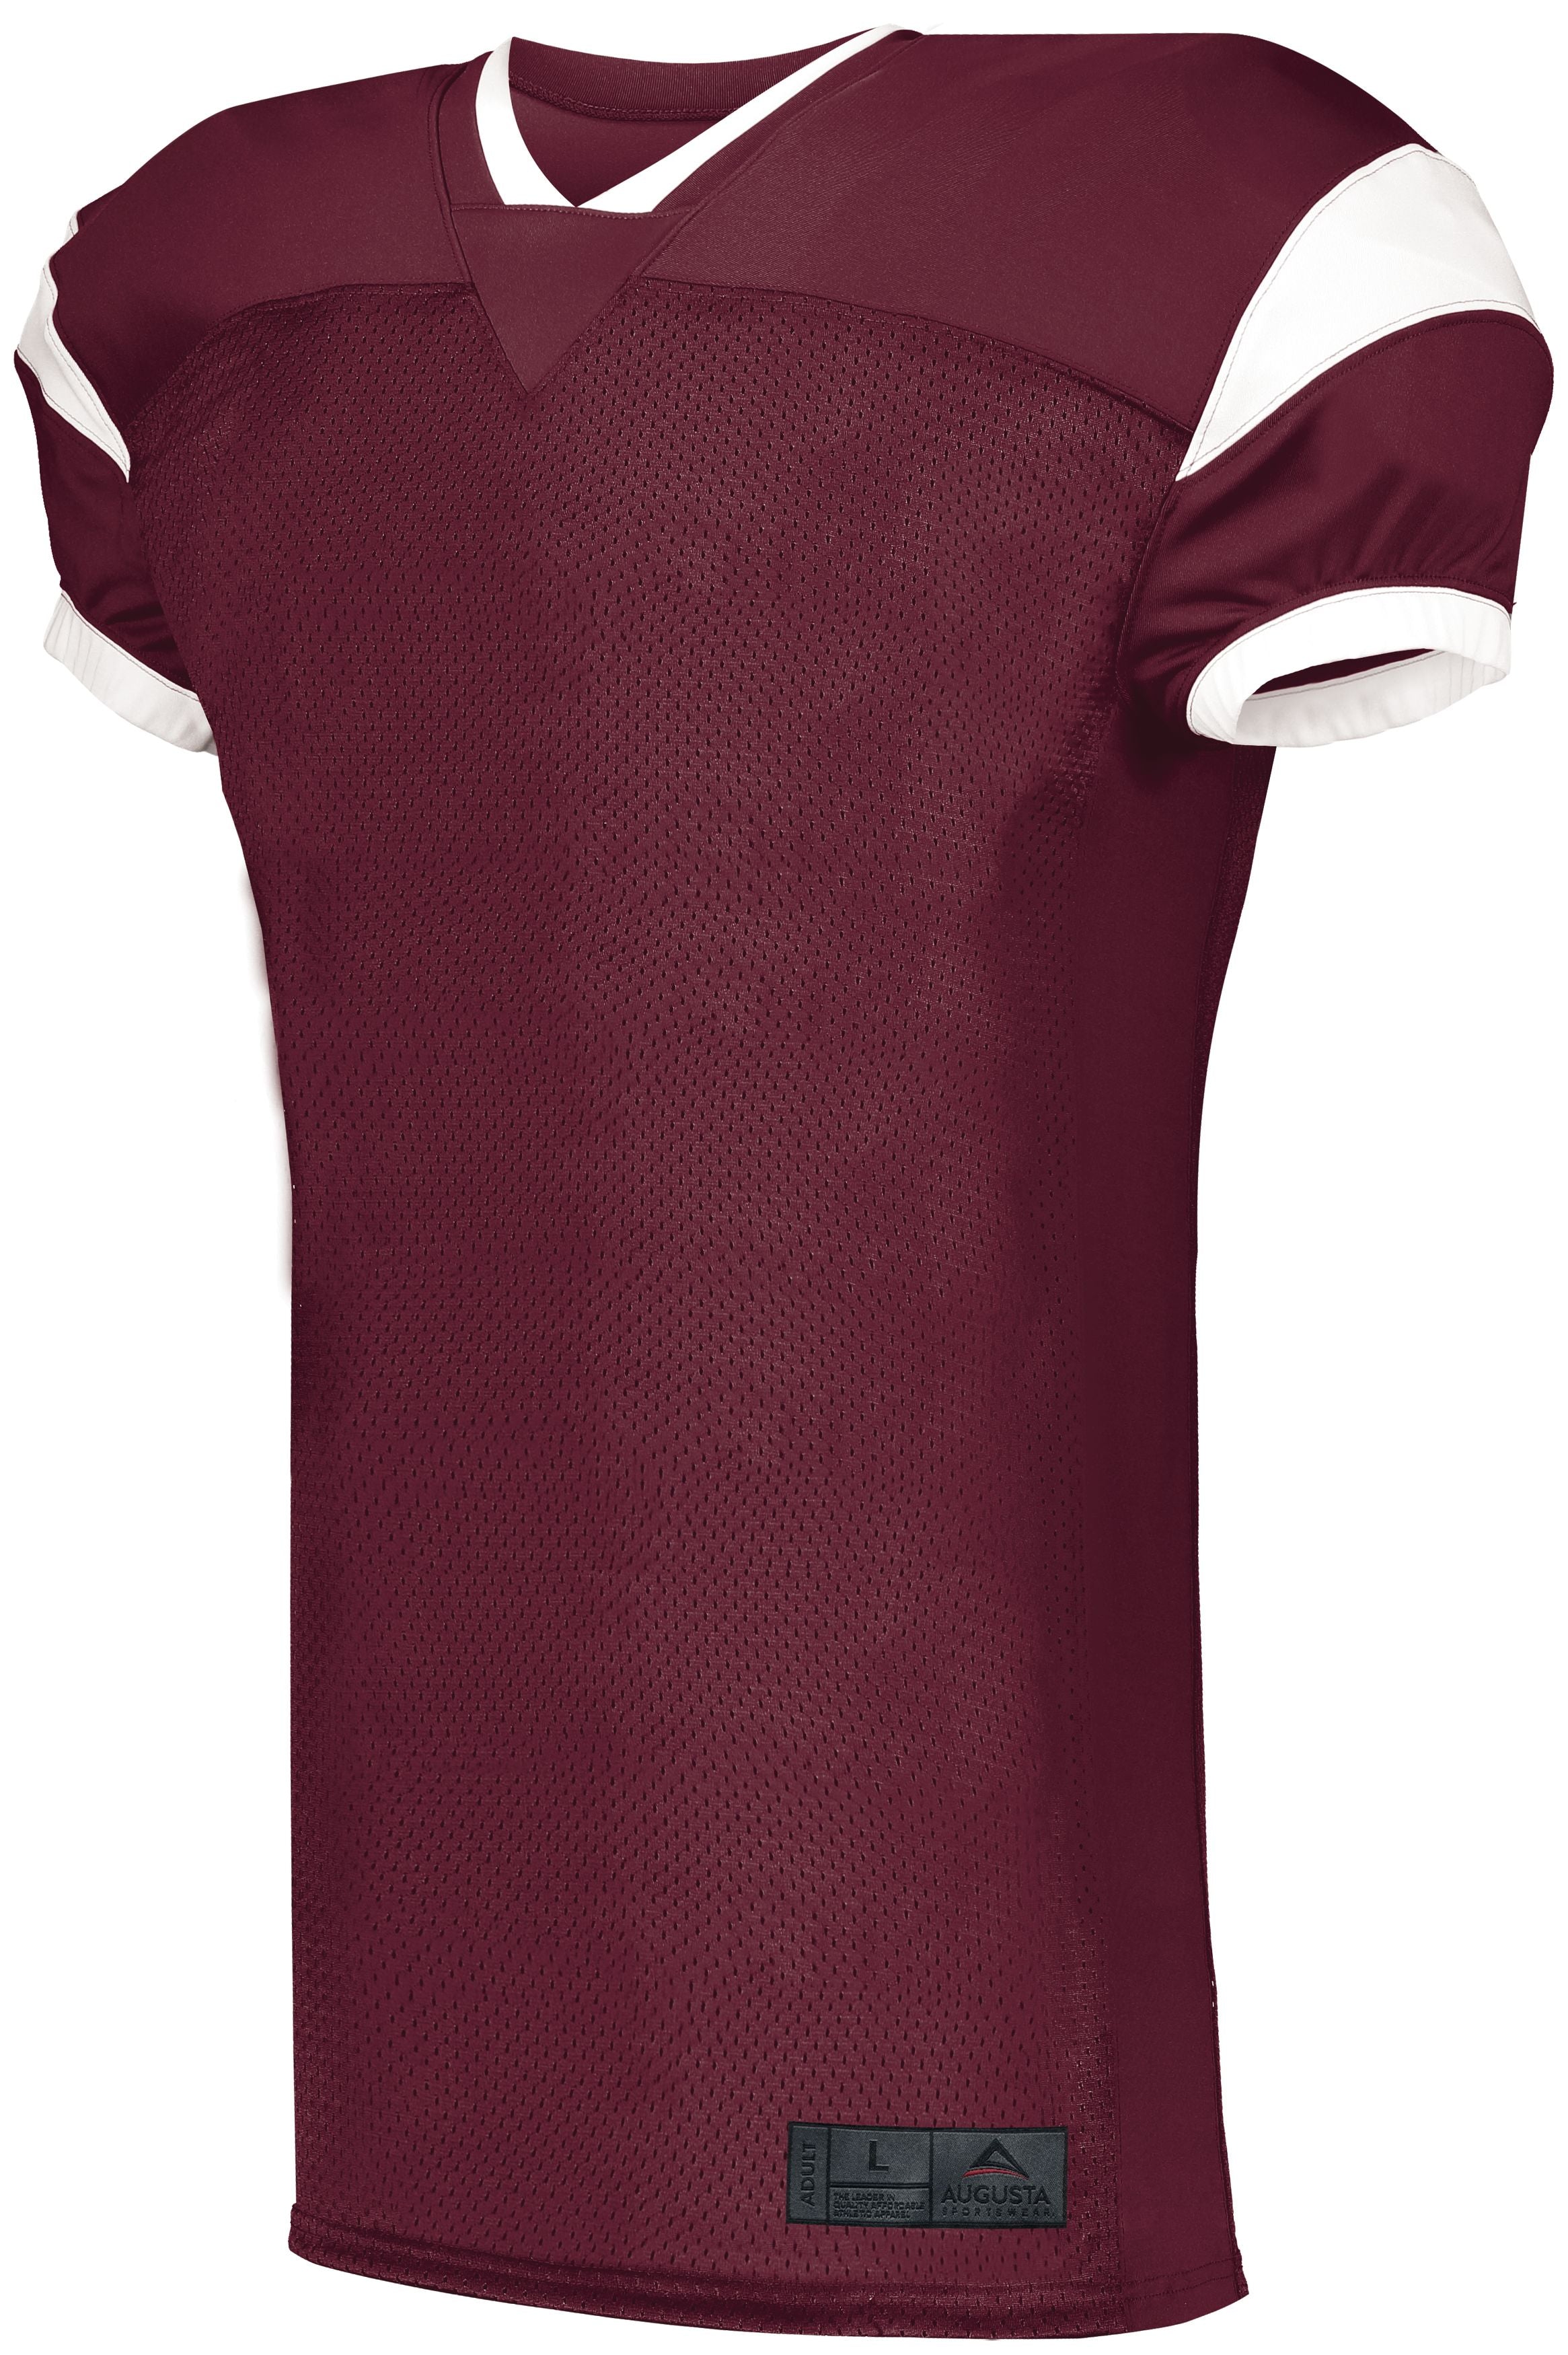 Augusta Sportswear Youth Slant Football Jersey in Maroon/White  -Part of the Youth, Youth-Jersey, Augusta-Products, Football, Shirts, All-Sports, All-Sports-1 product lines at KanaleyCreations.com